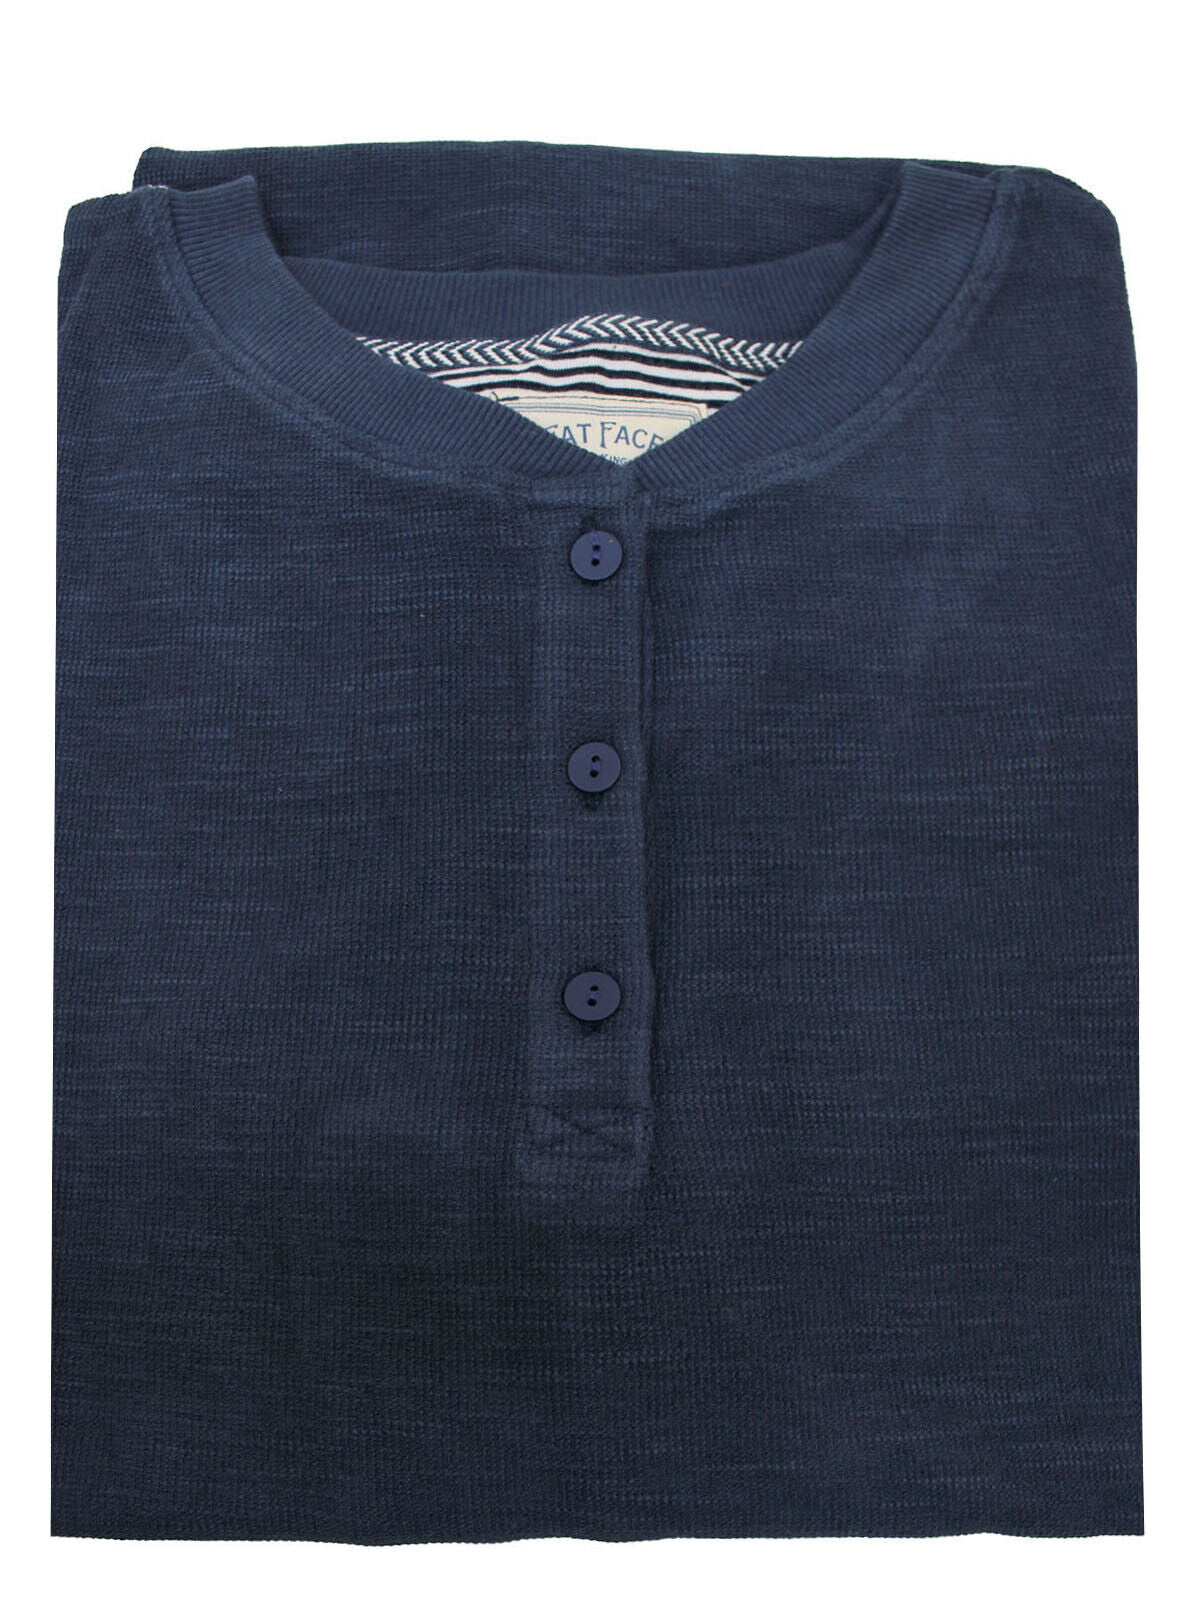 EX Fat Face Navy Southbourne Henley Dress in Sizes 14, 16, 18 RRP £49.50